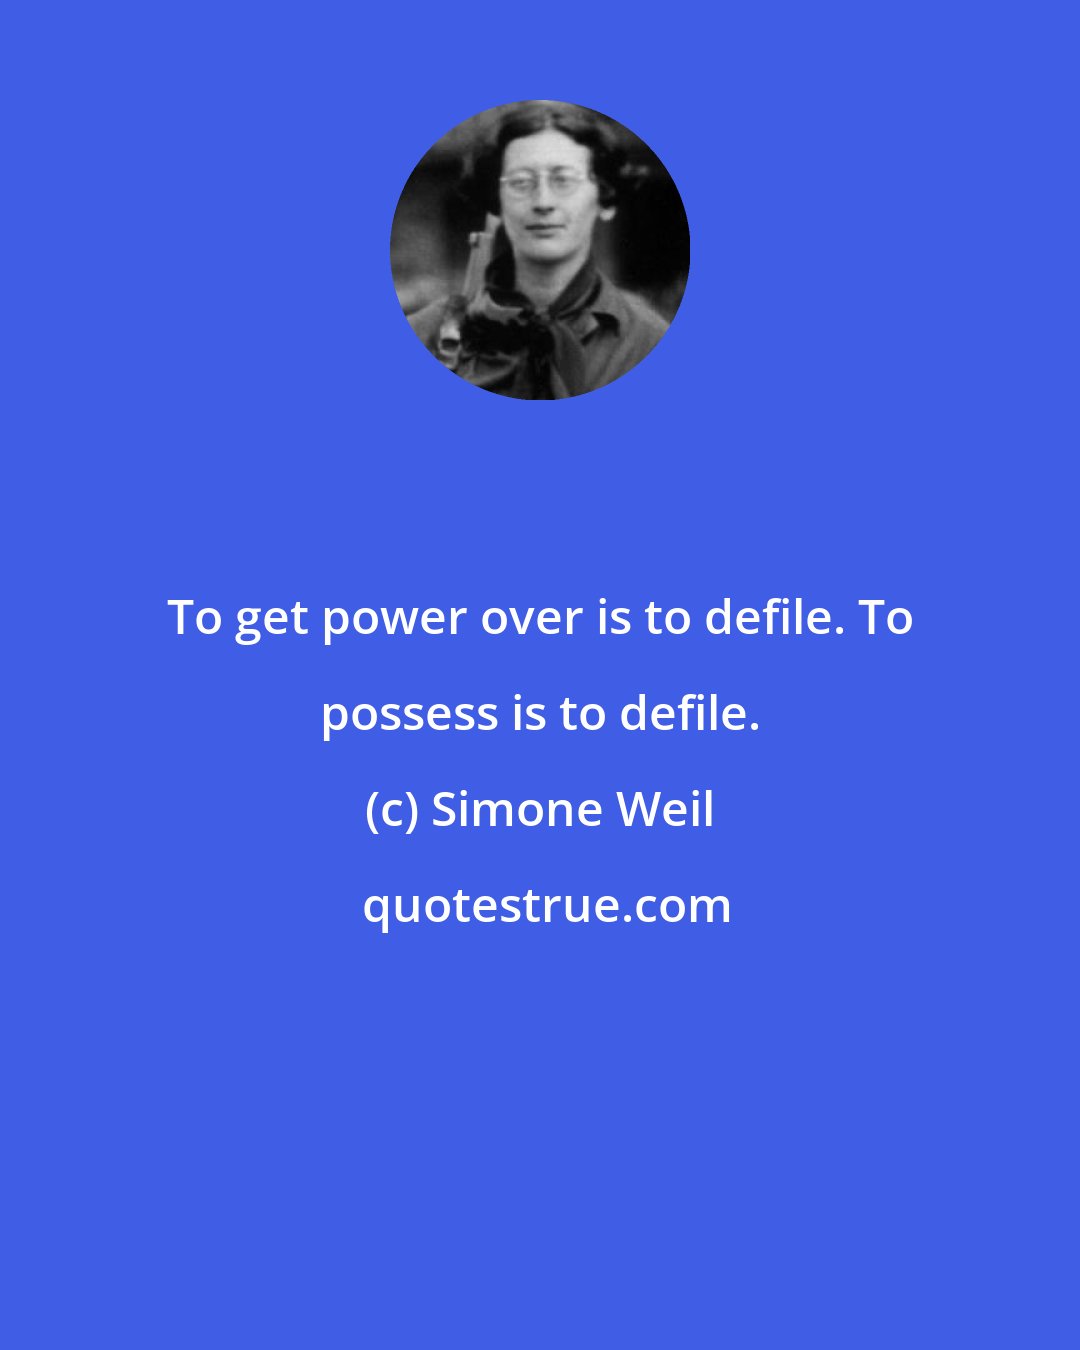 Simone Weil: To get power over is to defile. To possess is to defile.